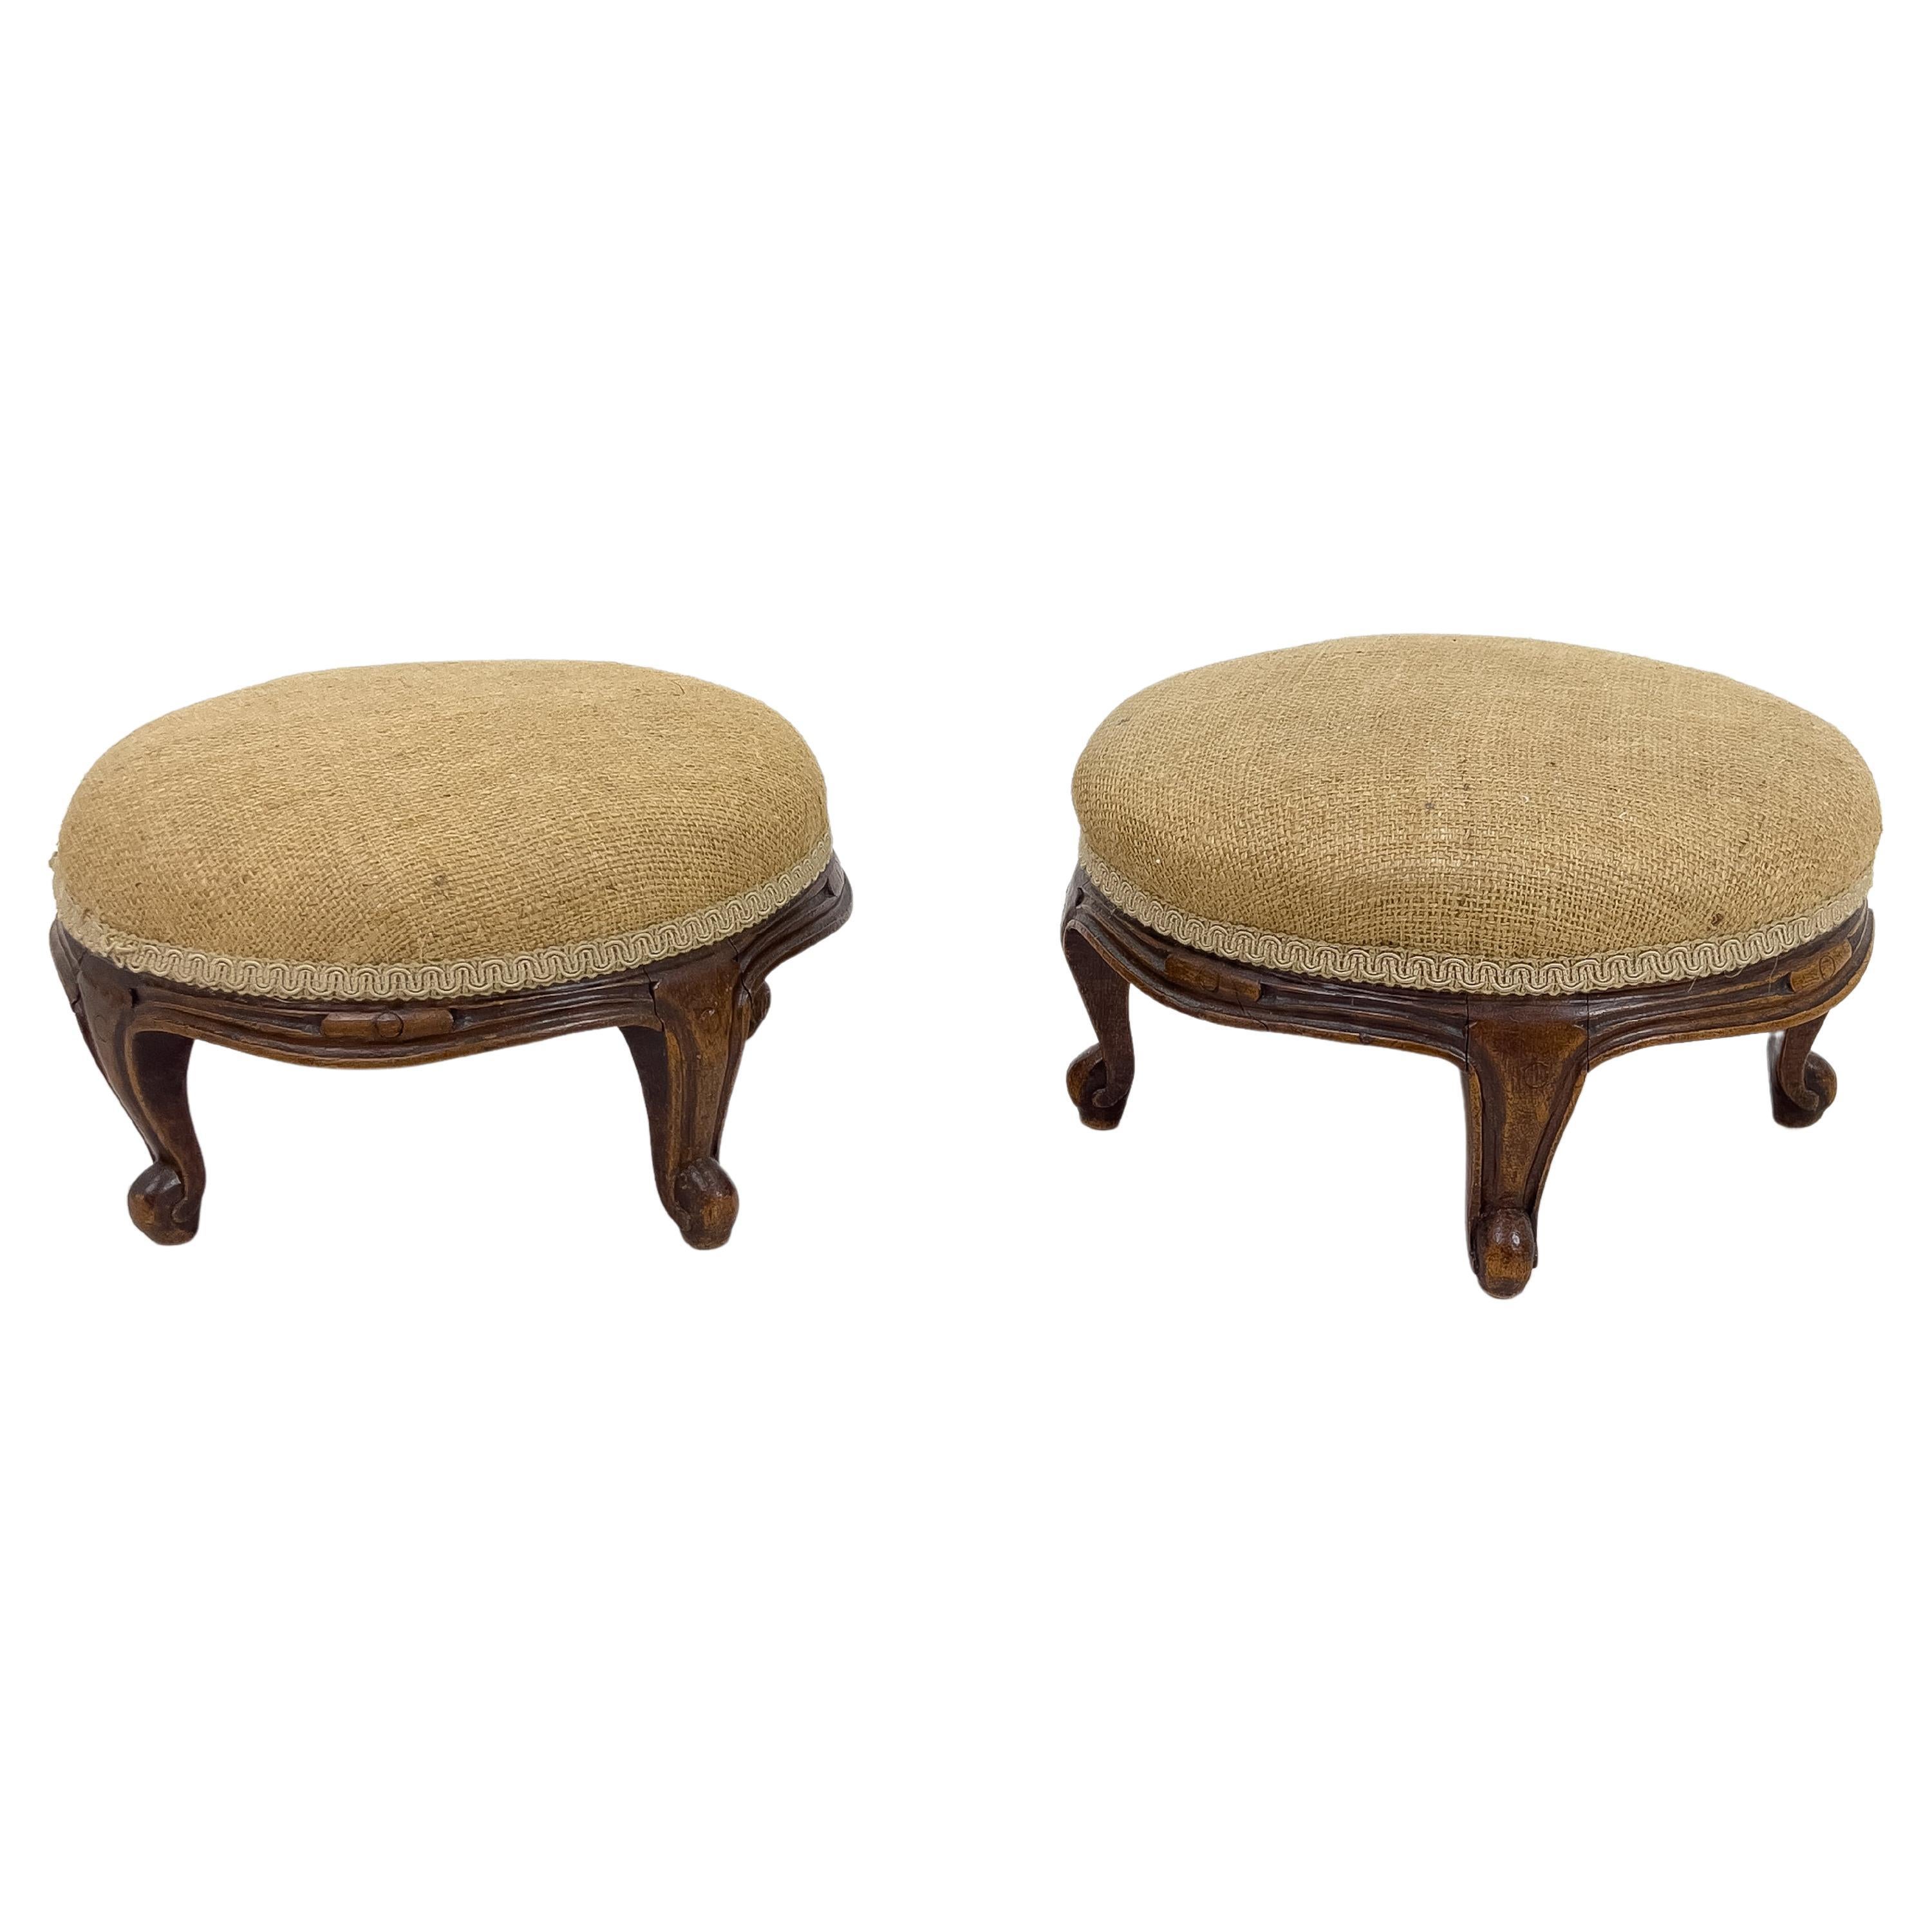 Pair of Small 19th Century Louis XV Style French Walnut and Burlap Foot Stools For Sale